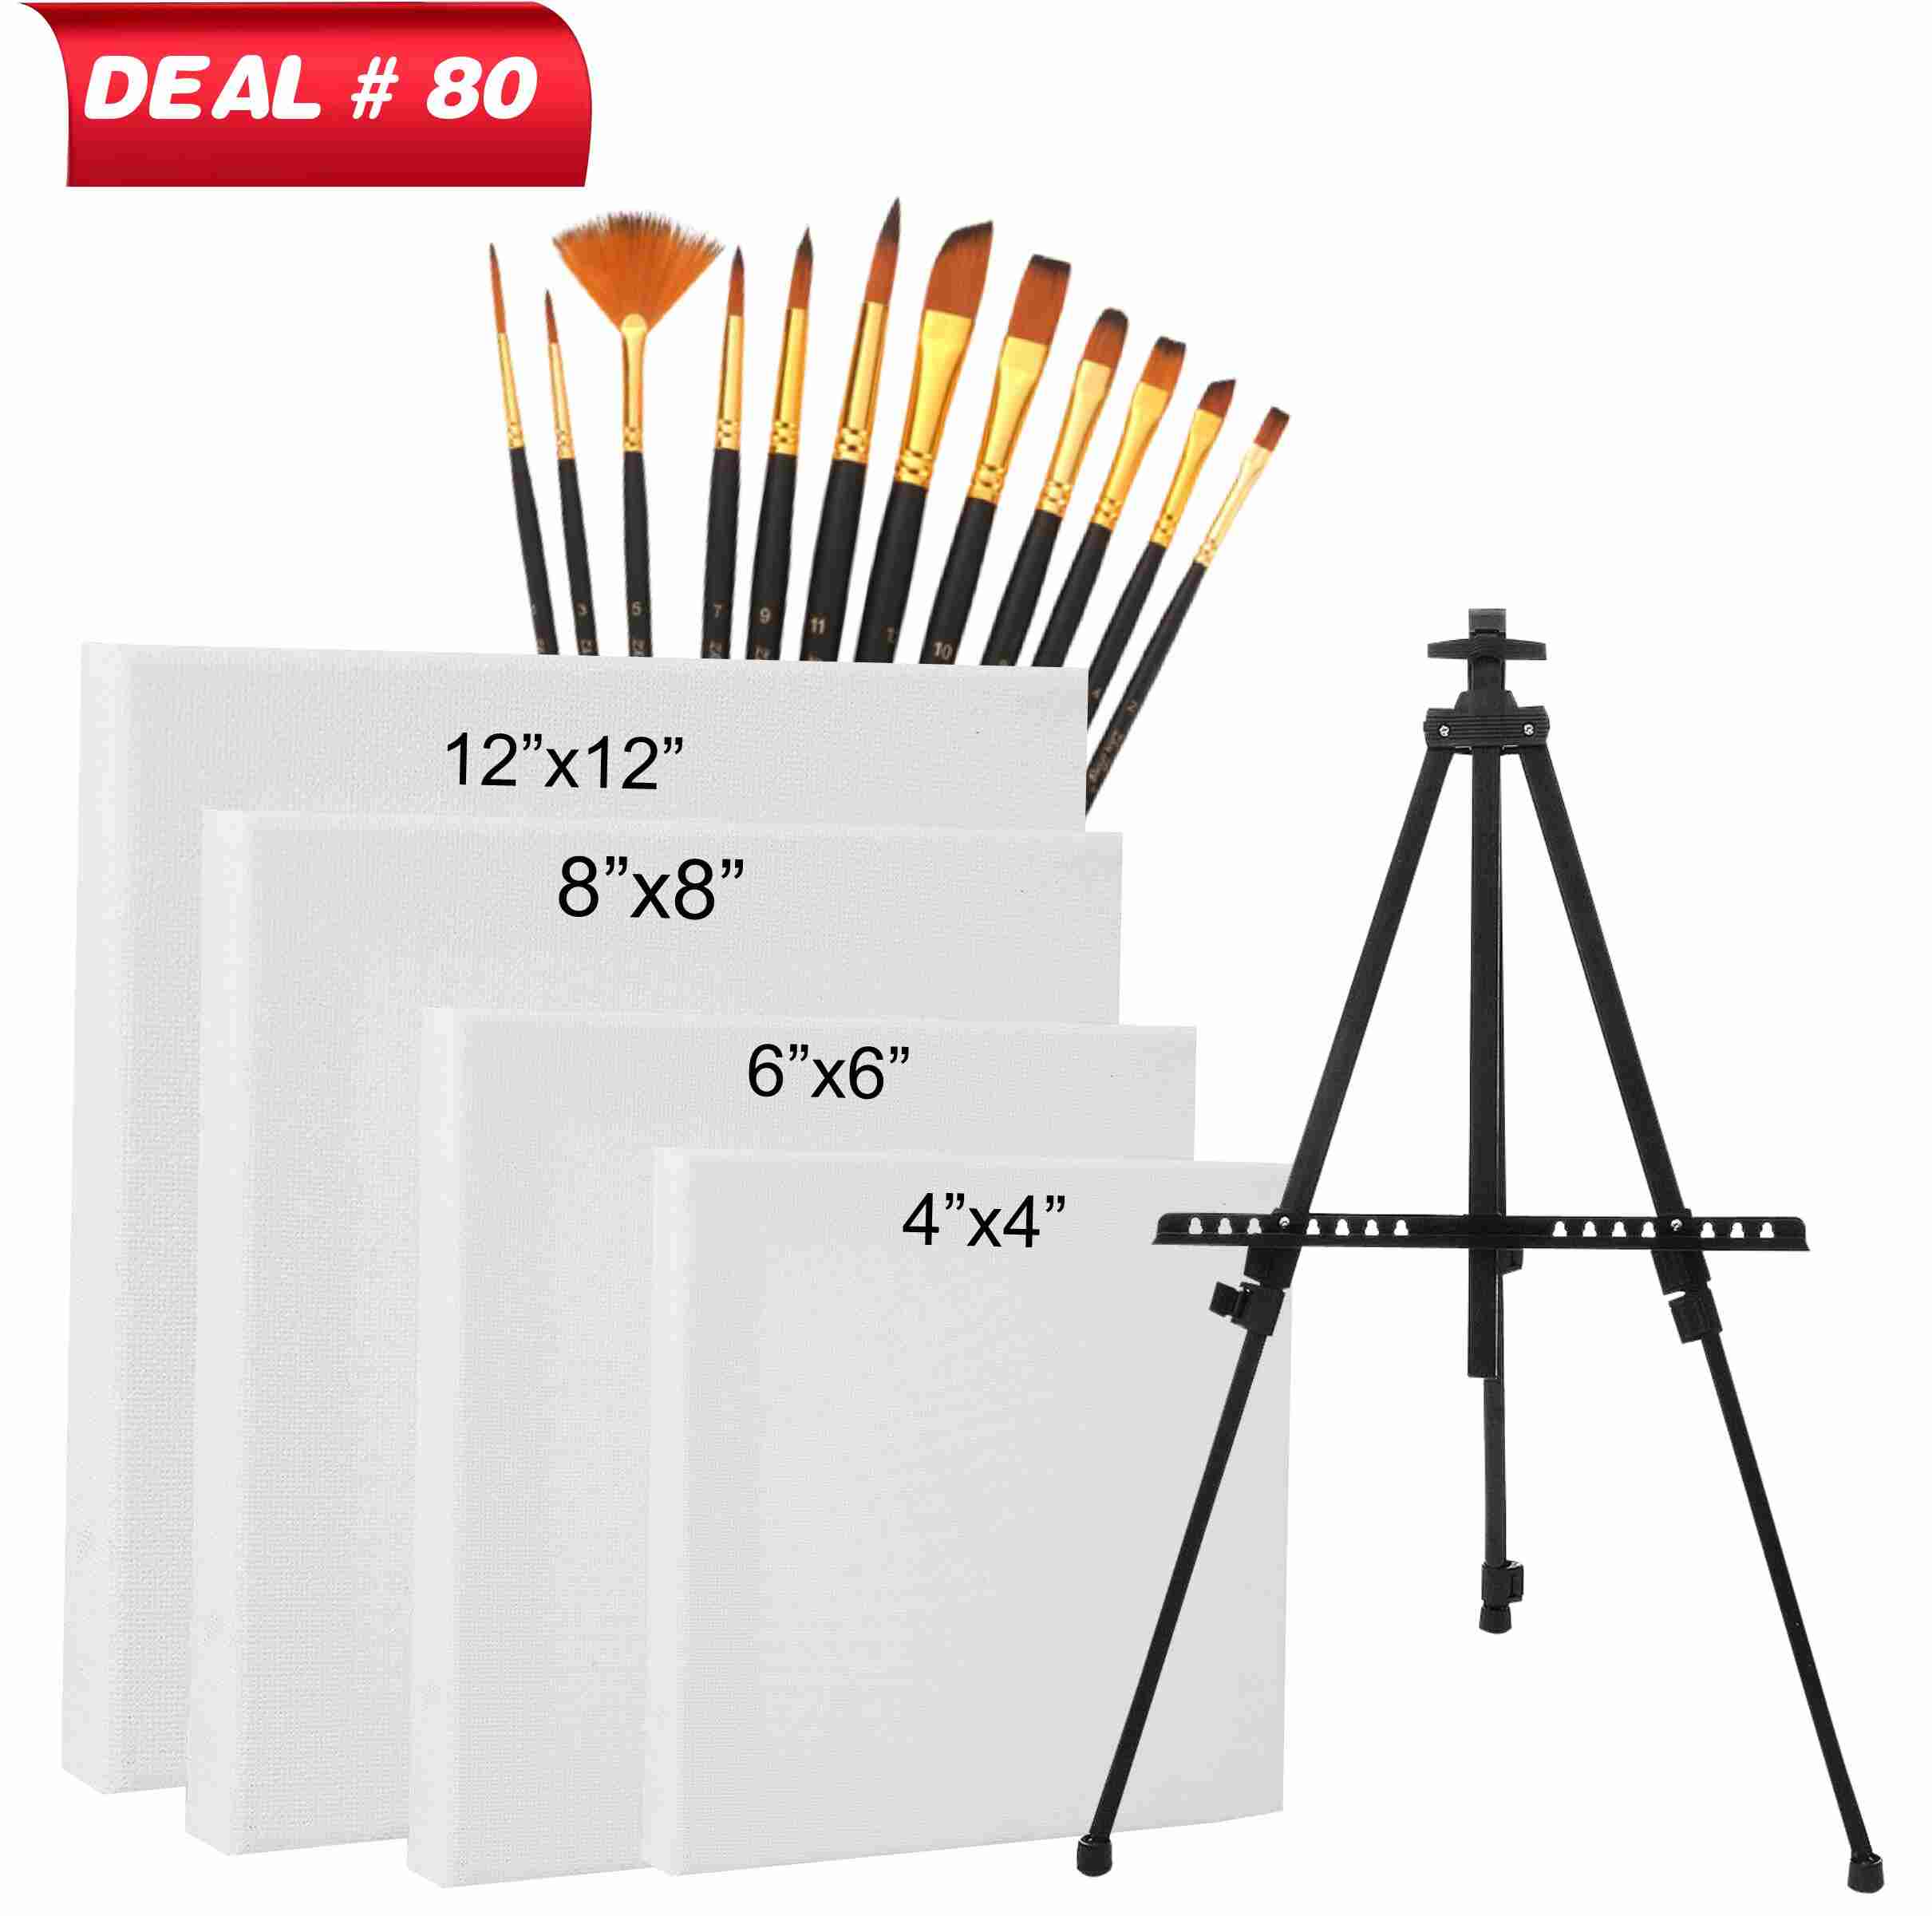 Canvas & Brush Deal For Artist, Deal No.80